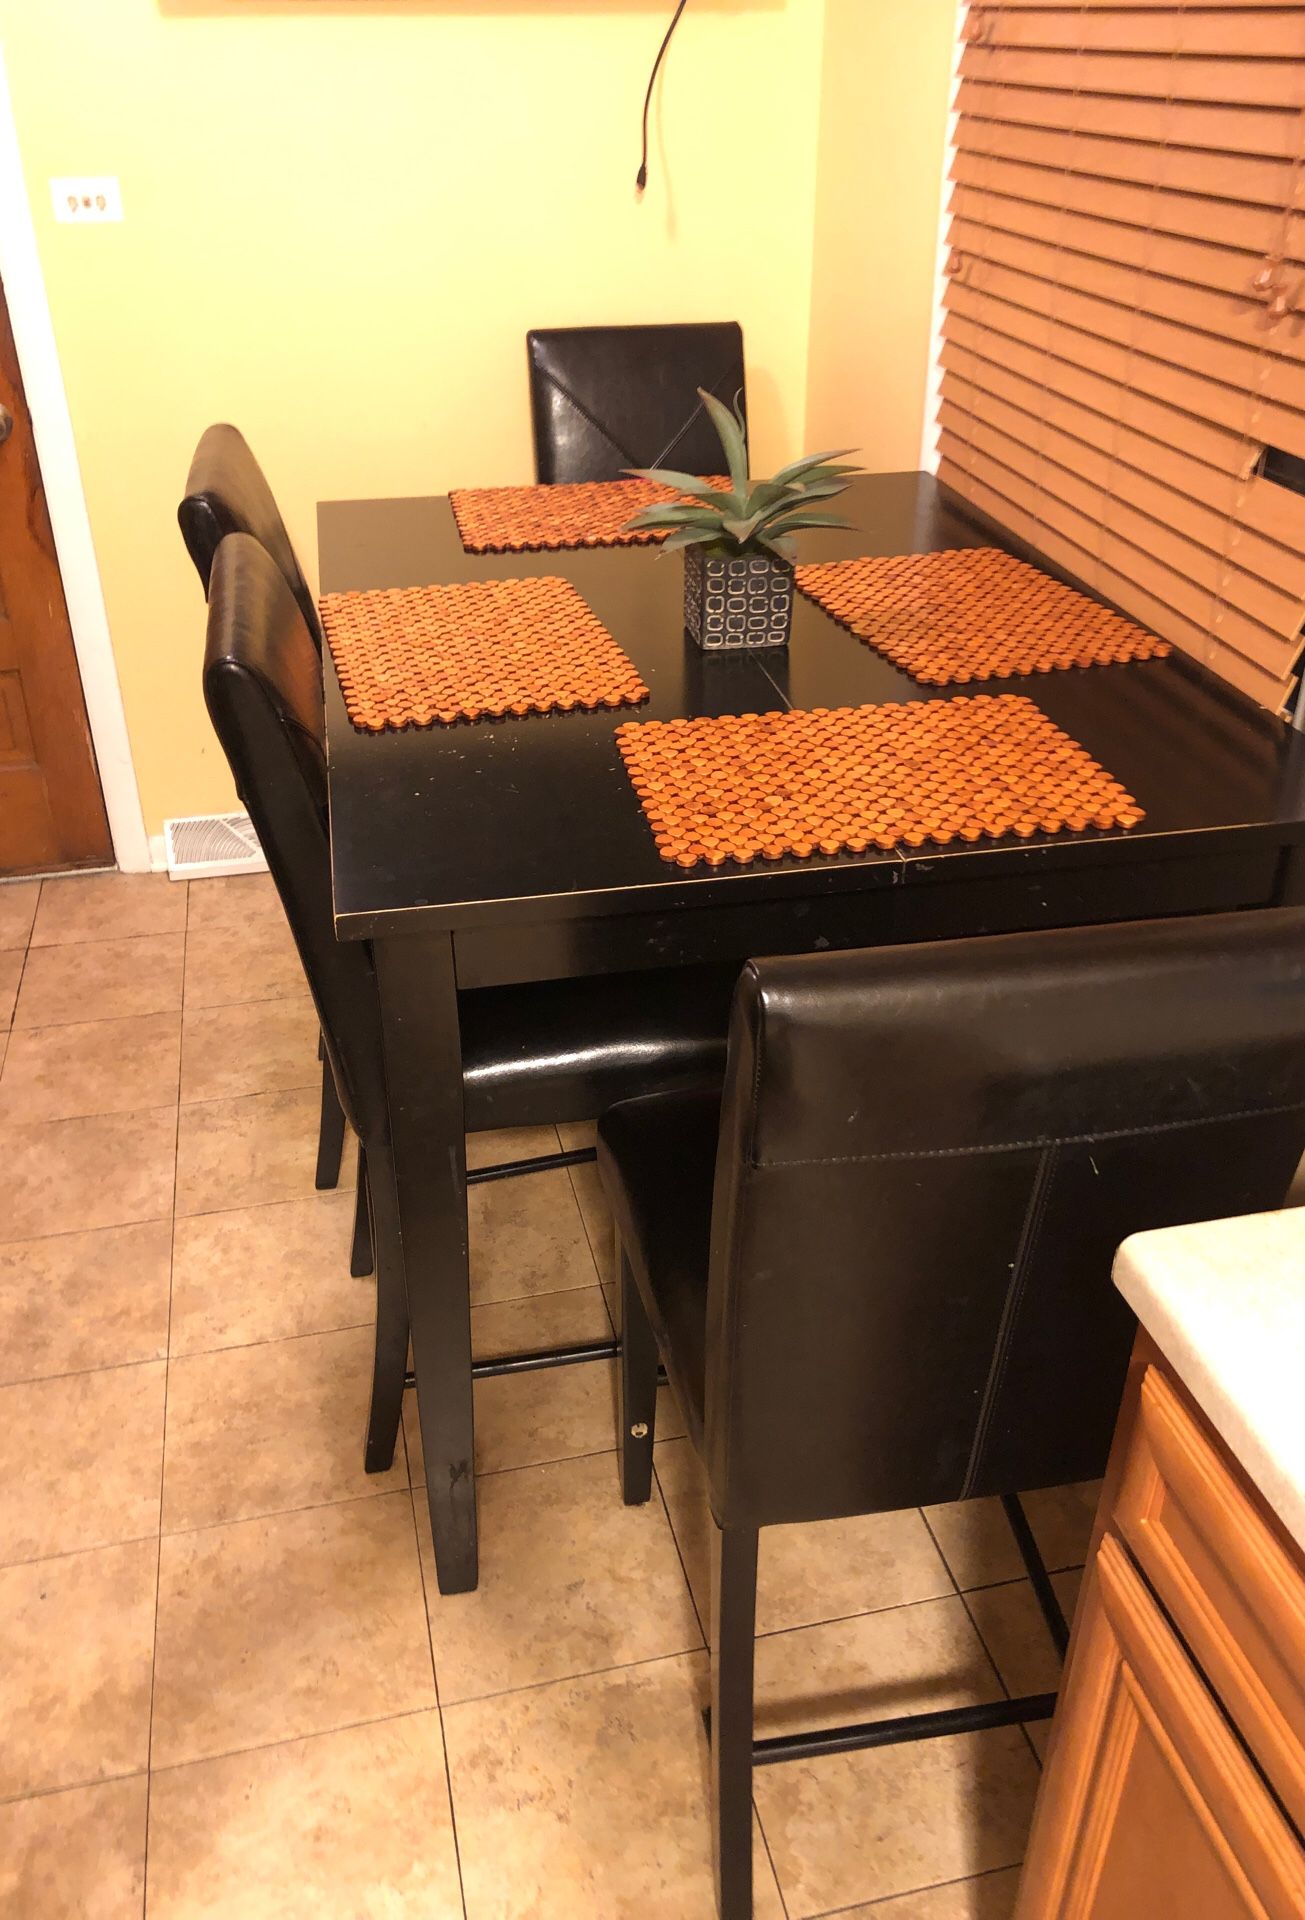 Kitchen/Dining set with 3 chairs a bench